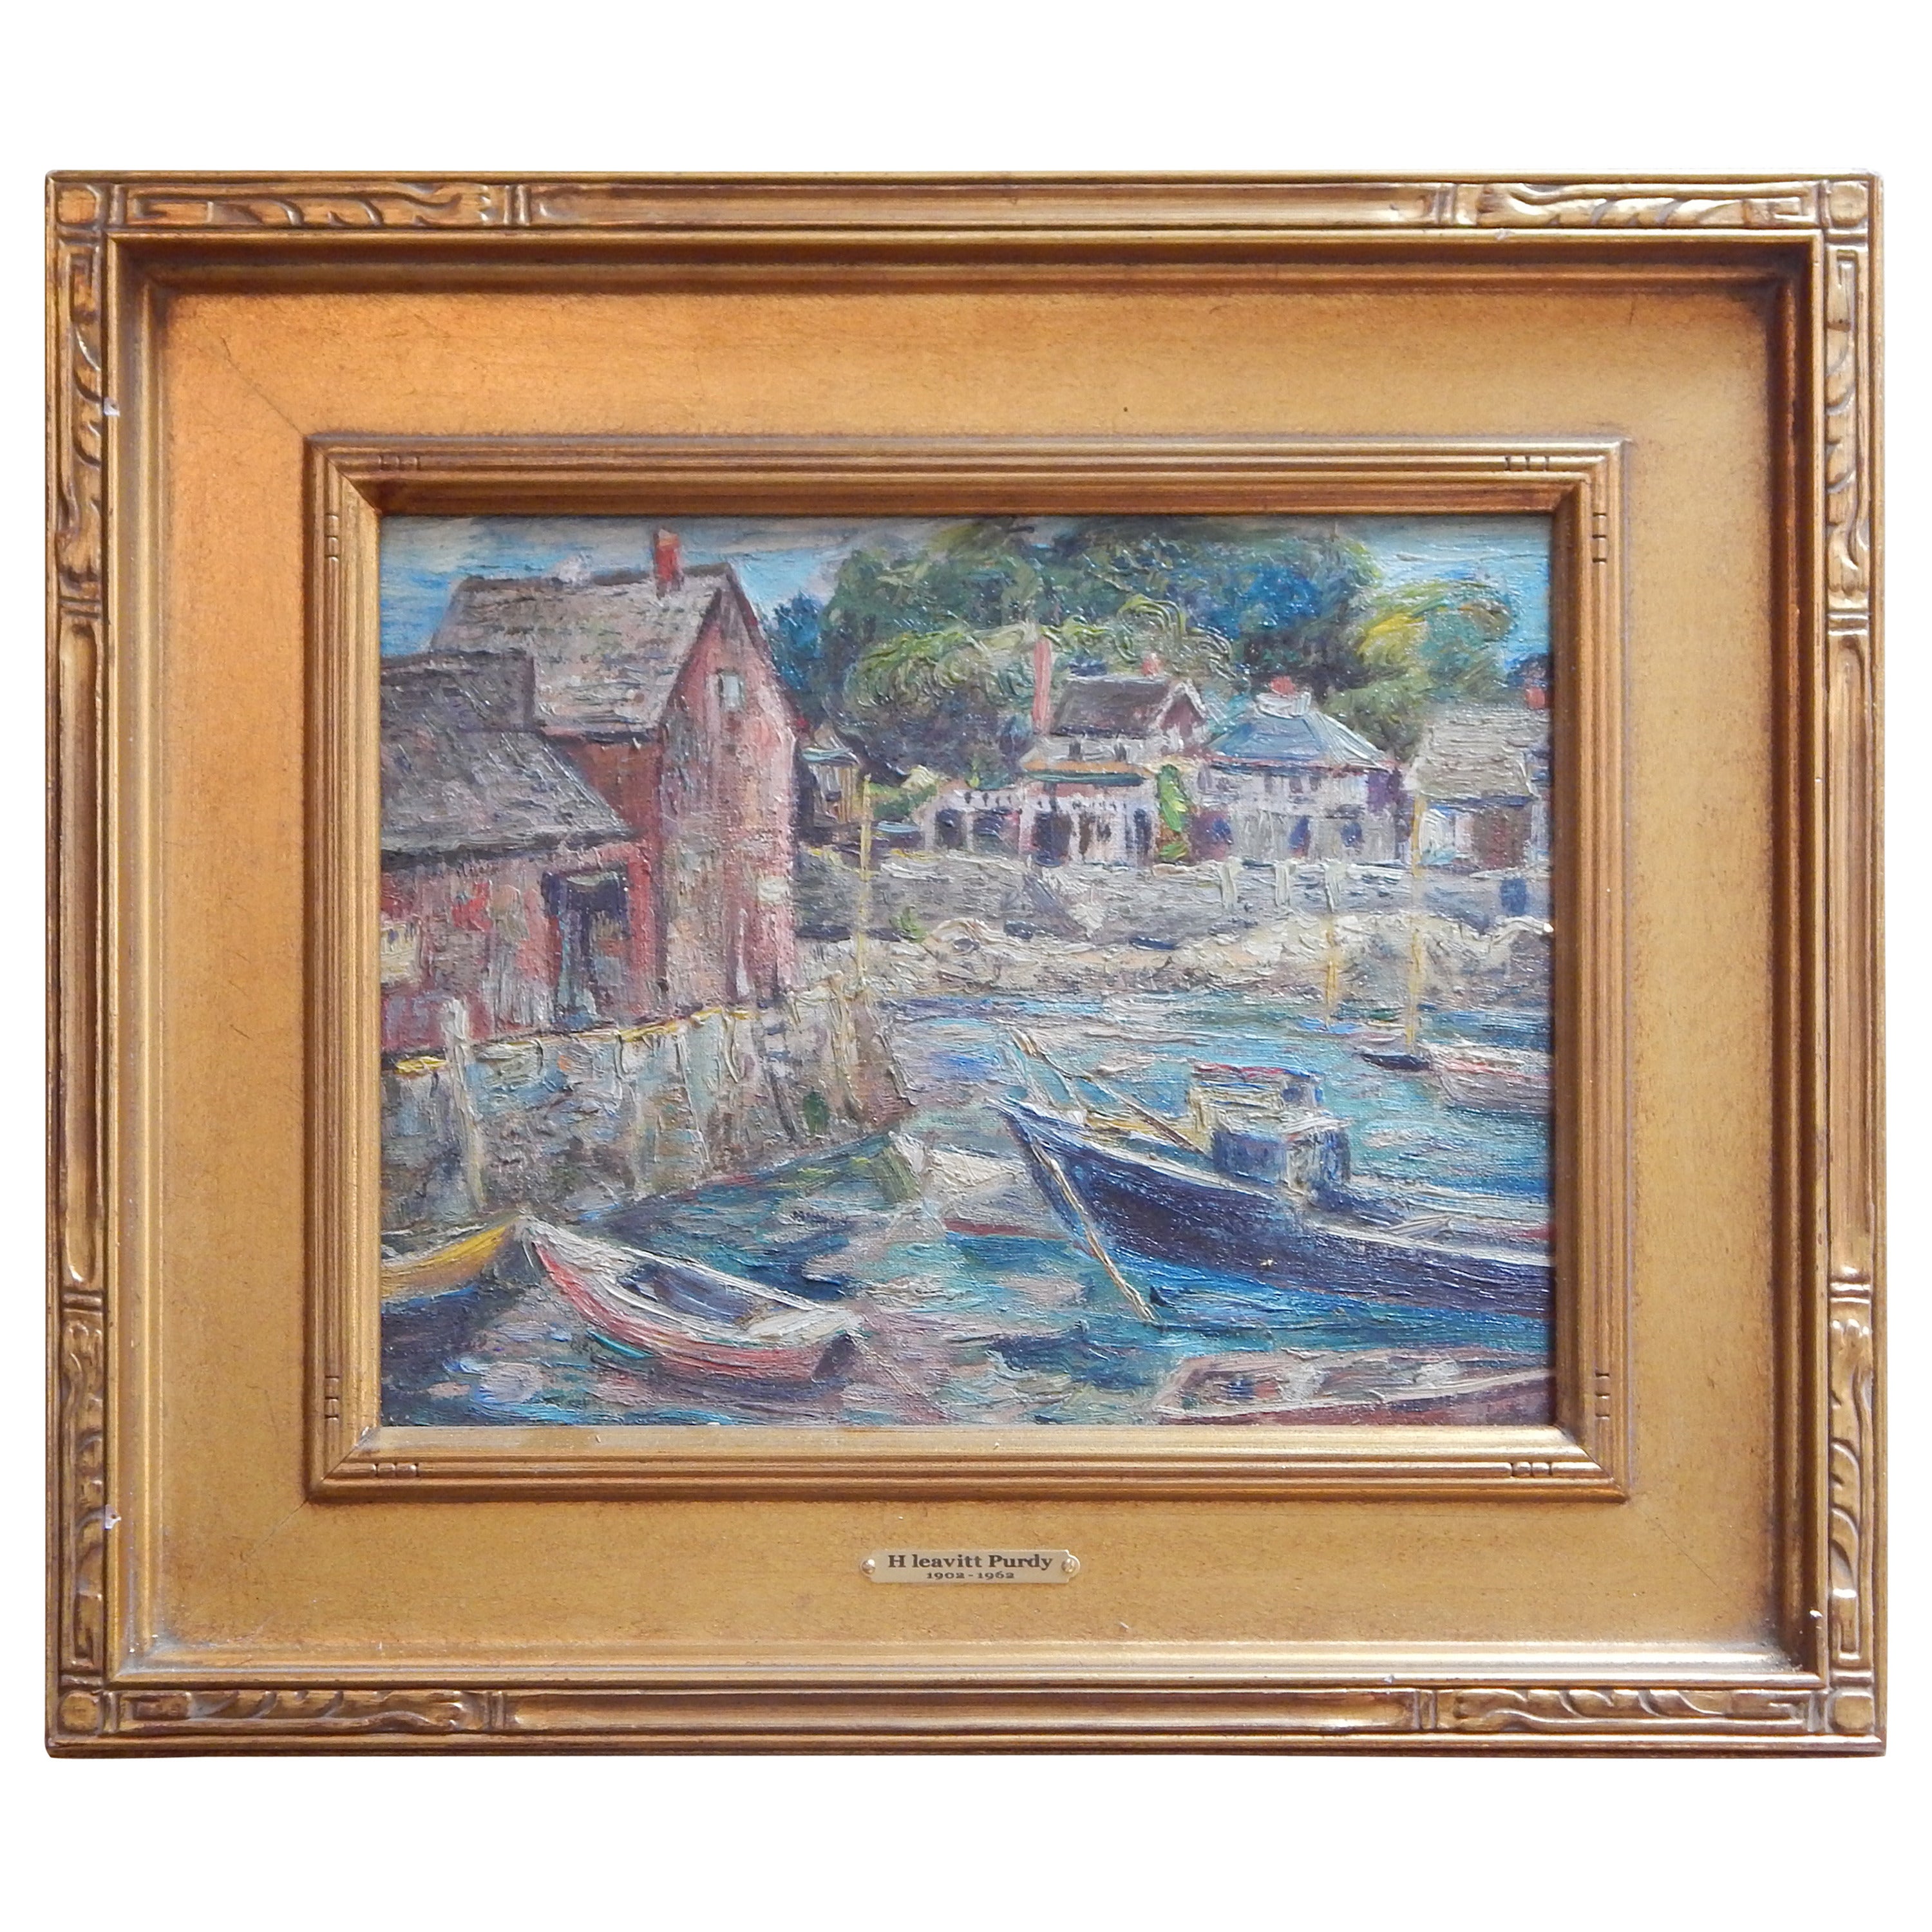 American Impressionist Painting of a Connecticut Harbor by H. Leavitt Purdy